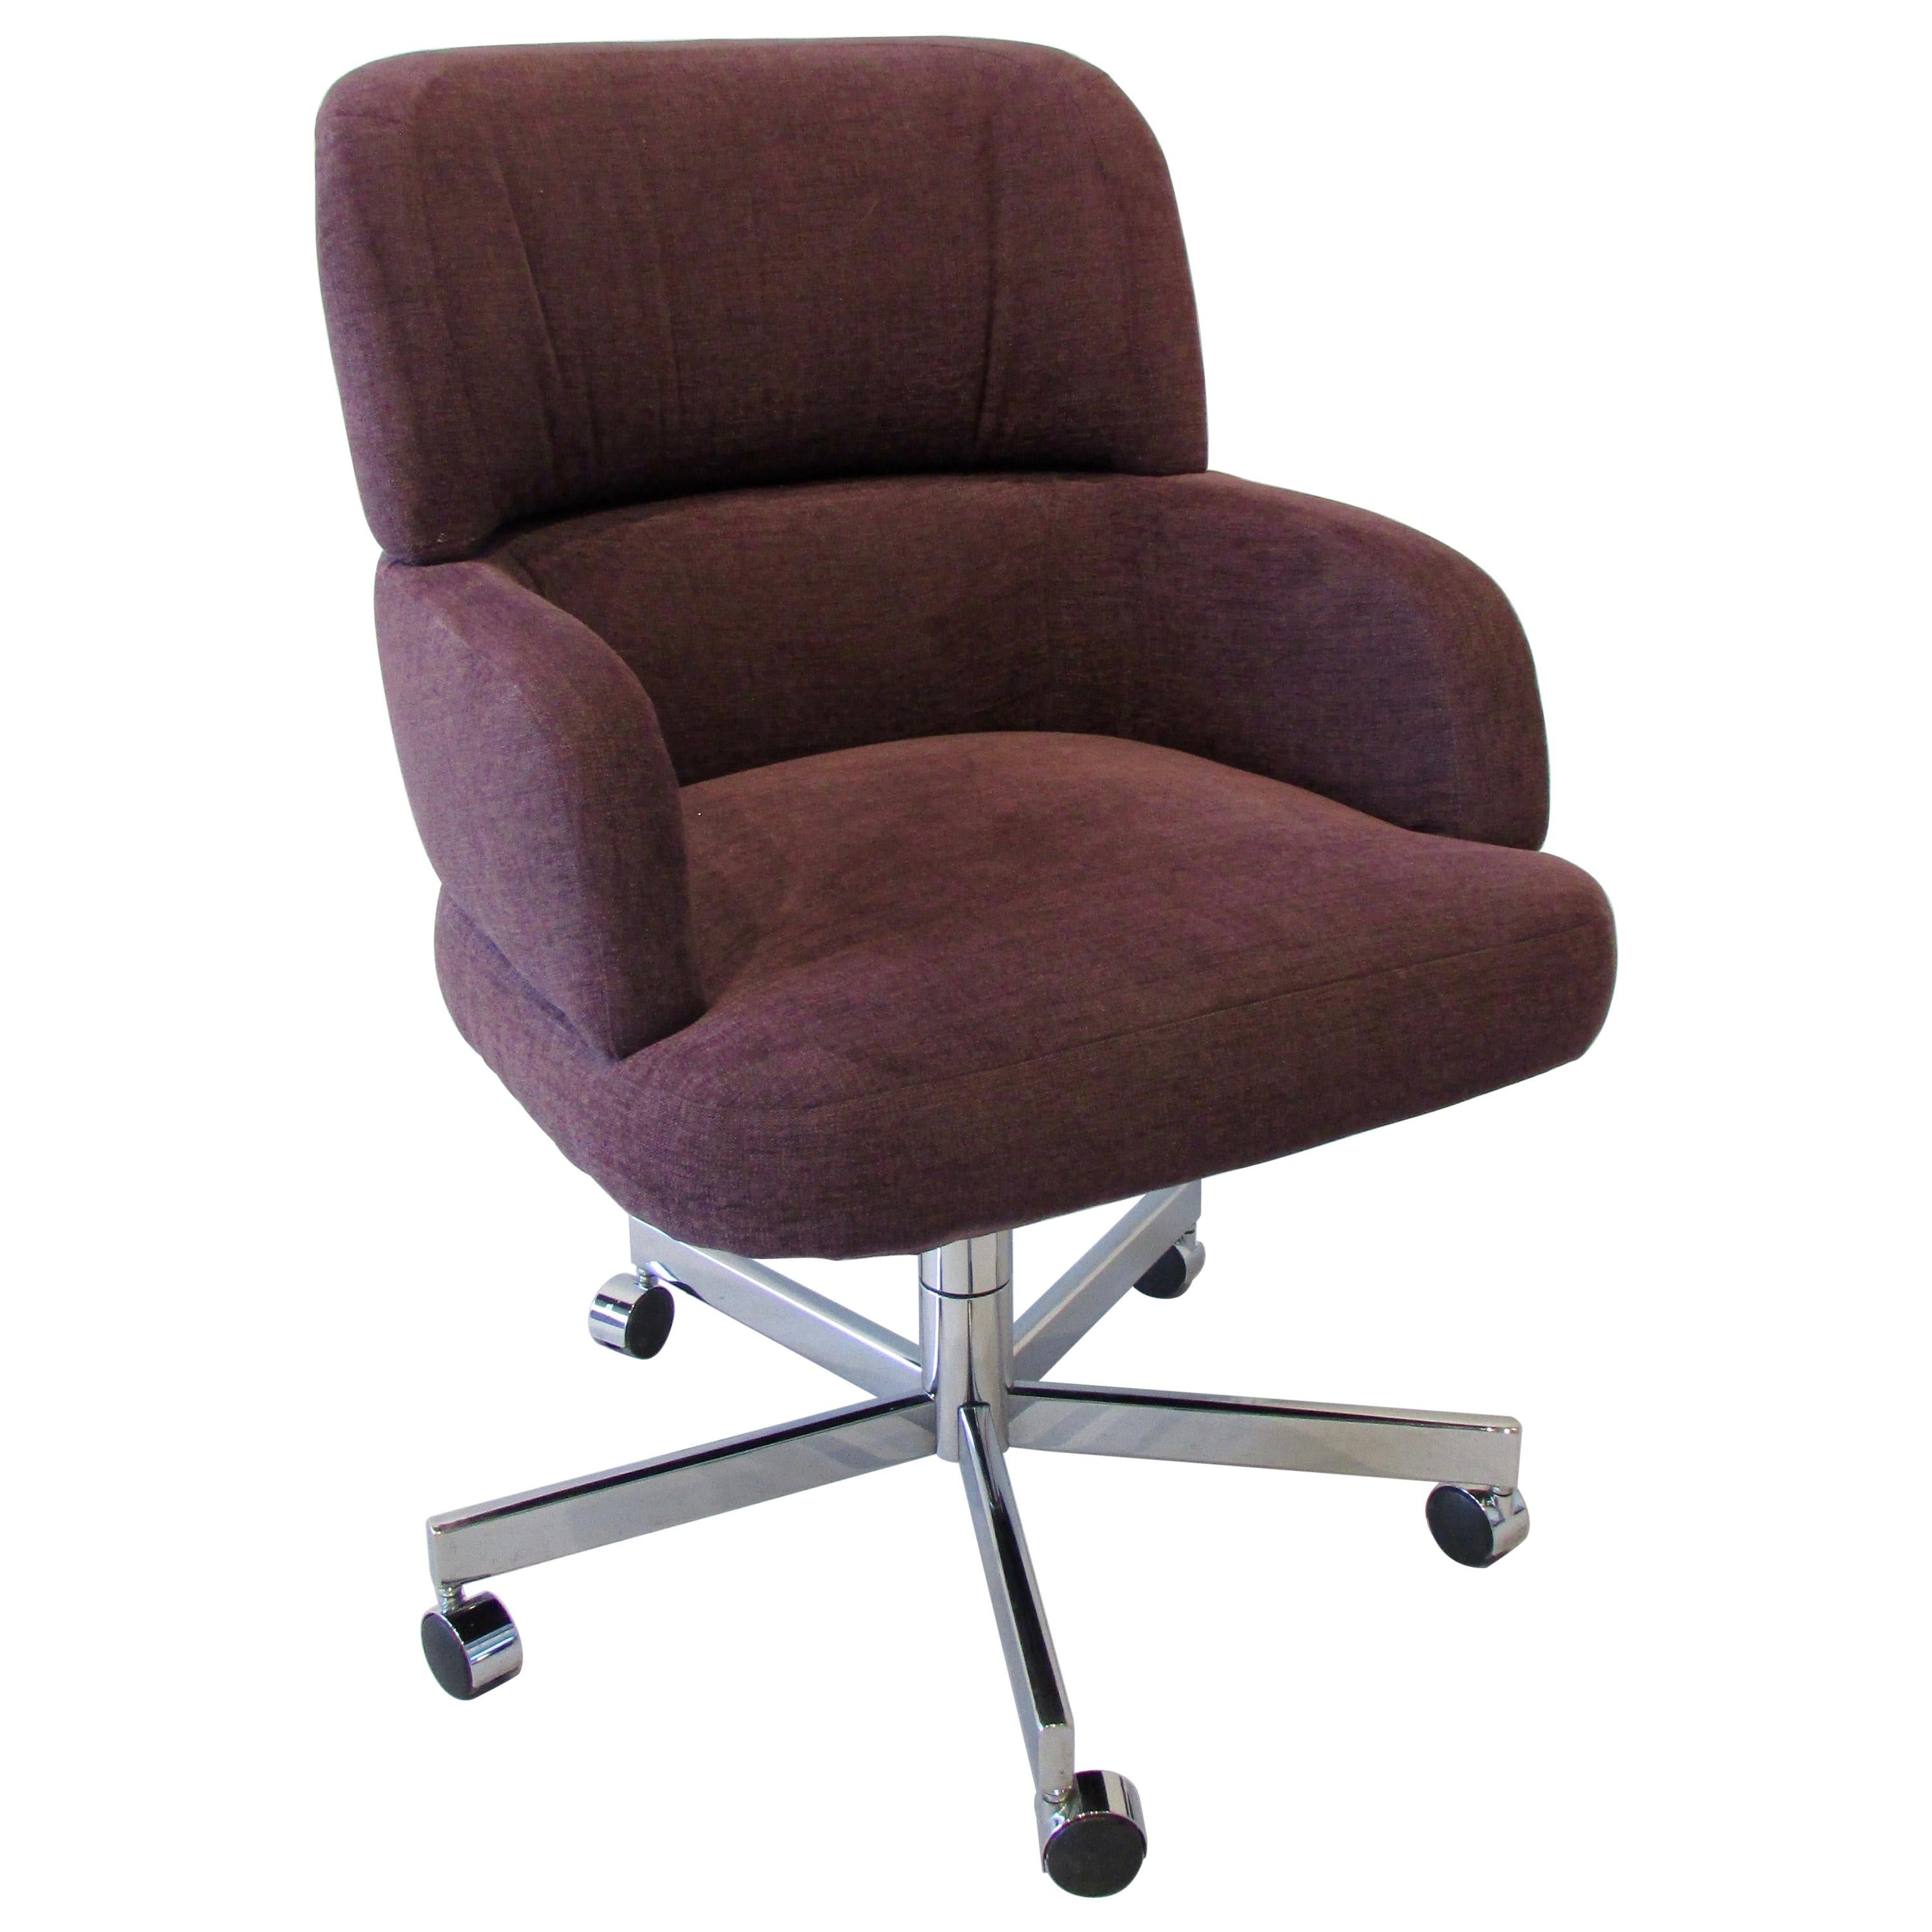 Swivel Tilt Office Chair in Purple Fabric by Fortress Co California